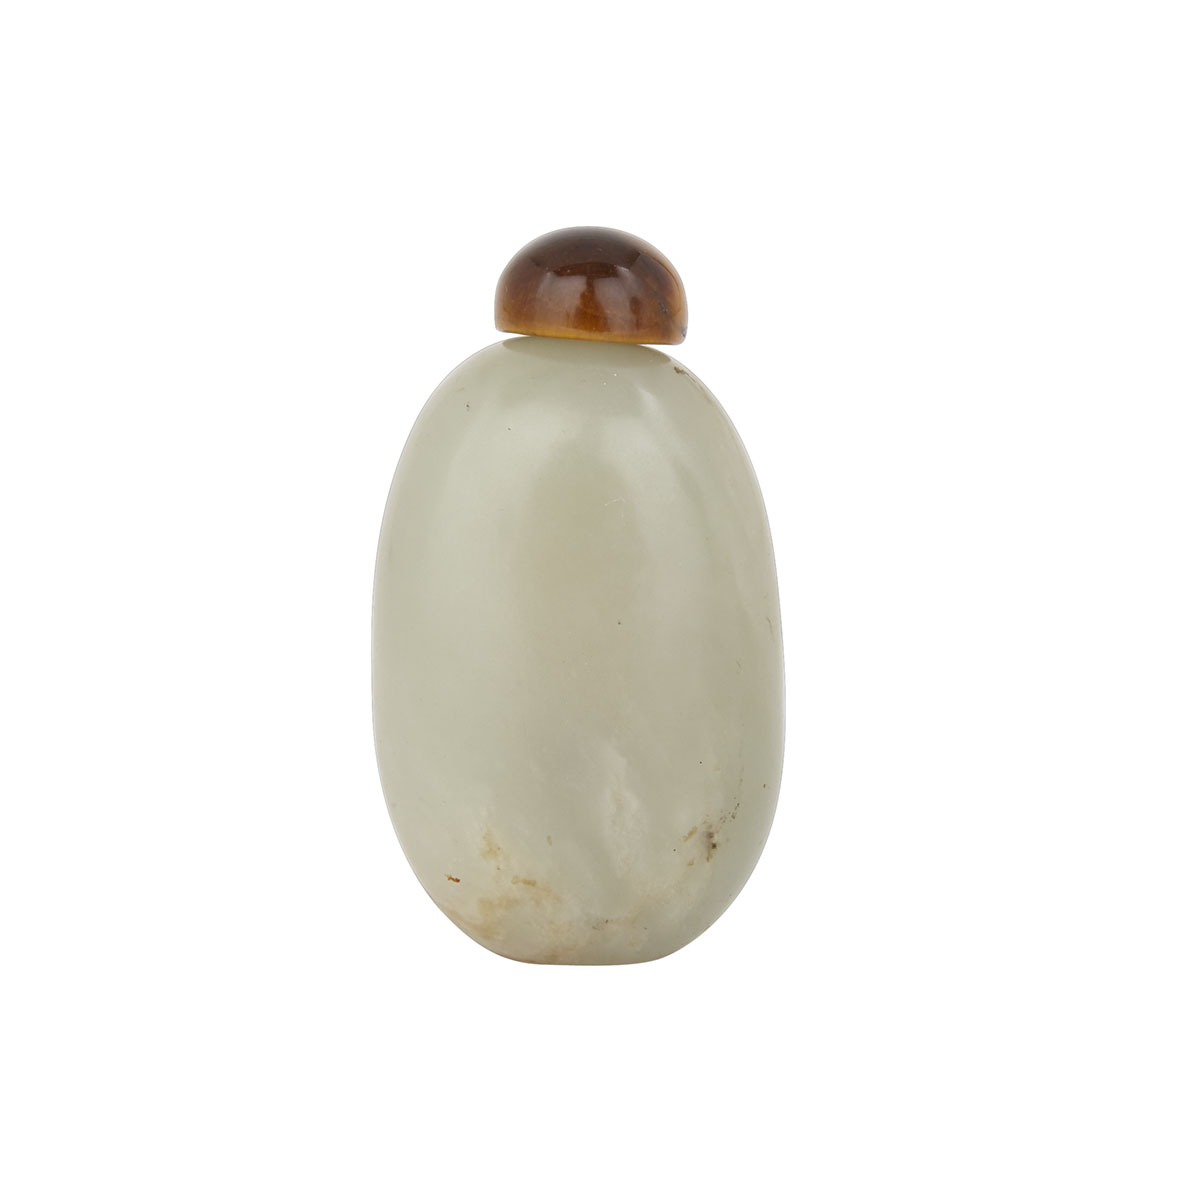 A Celadon Jade Snuff Bottle with a Tiger’s Eye Stopper, 19th Century